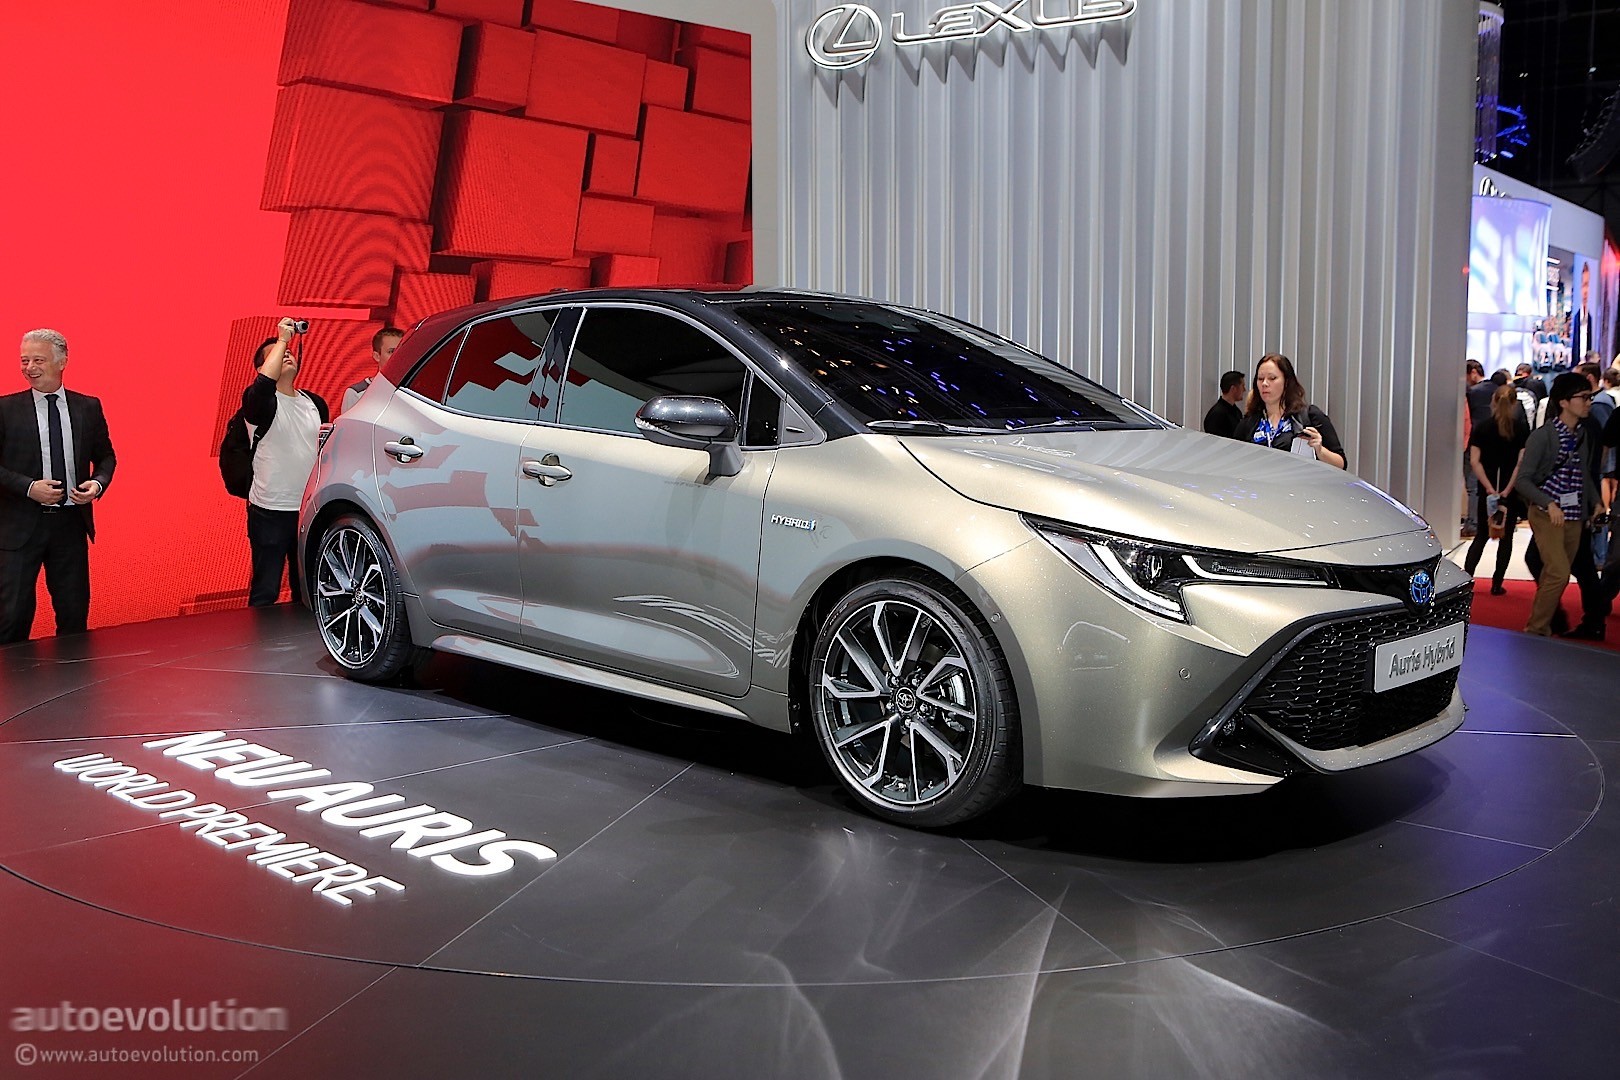 Toyota Launches Auris Compact in Japan, Toyota, Global Newsroom